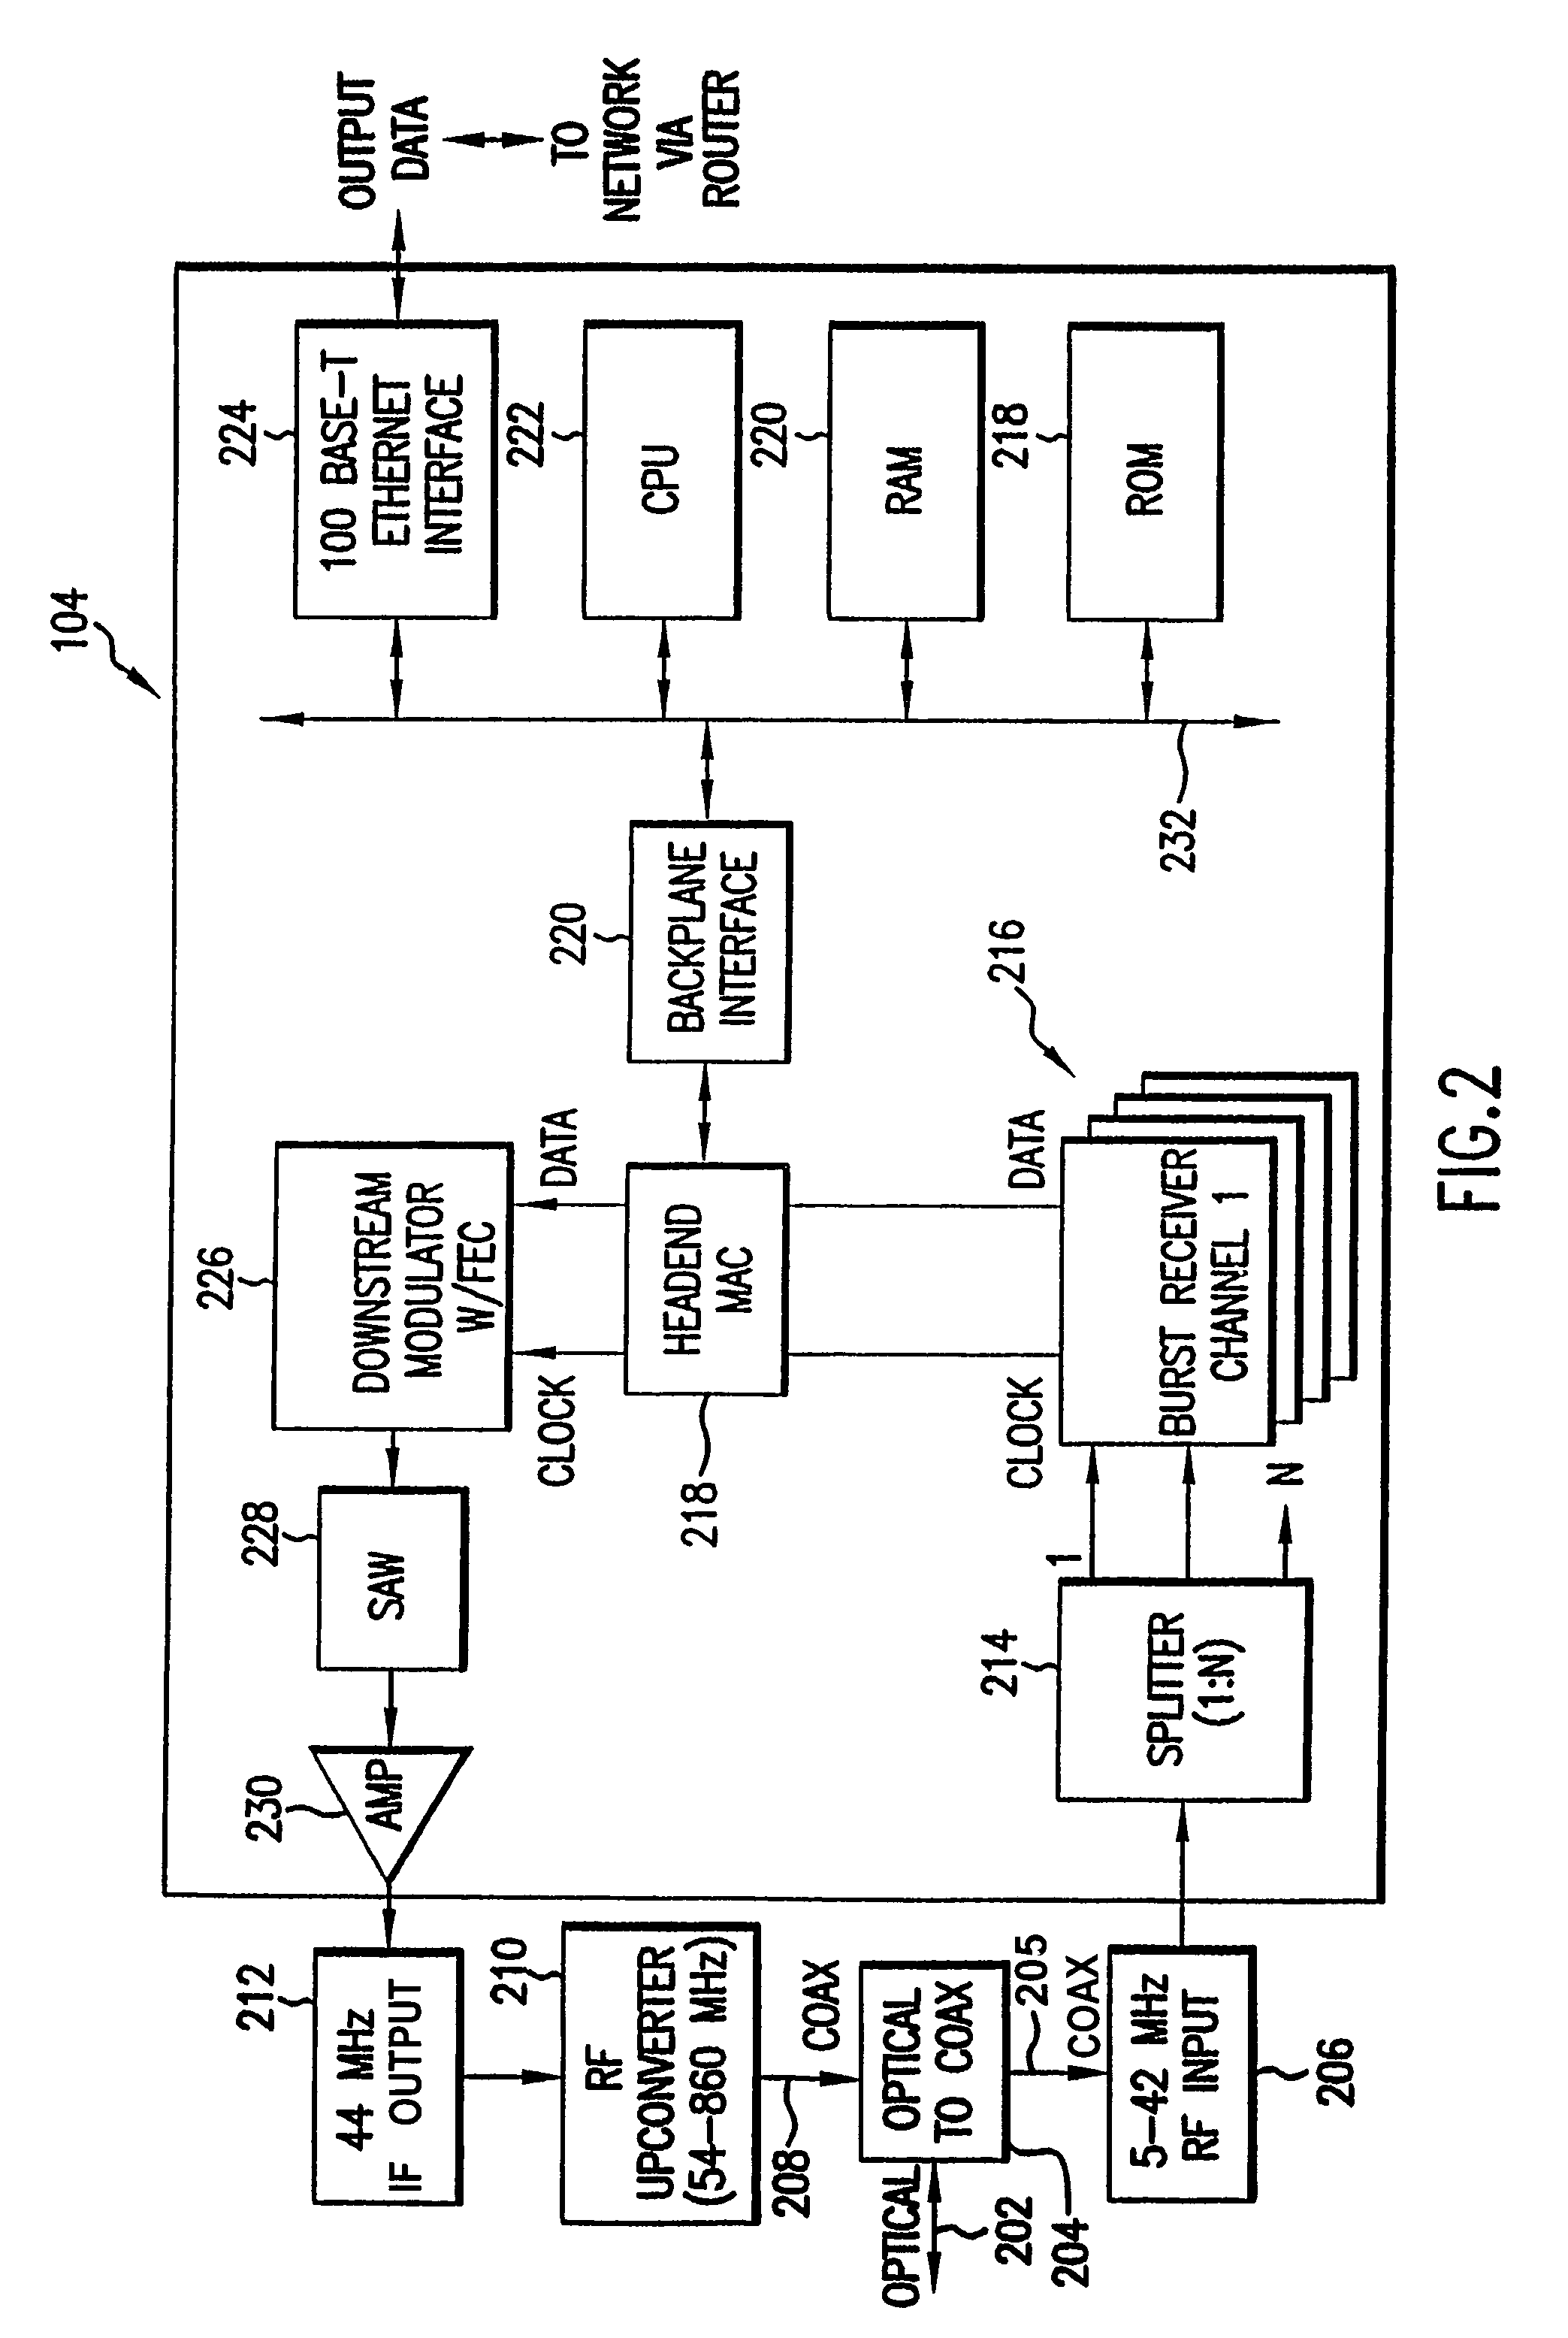 FEC block reconstruction system, method and computer program product for mitigating burst noise in a communications system